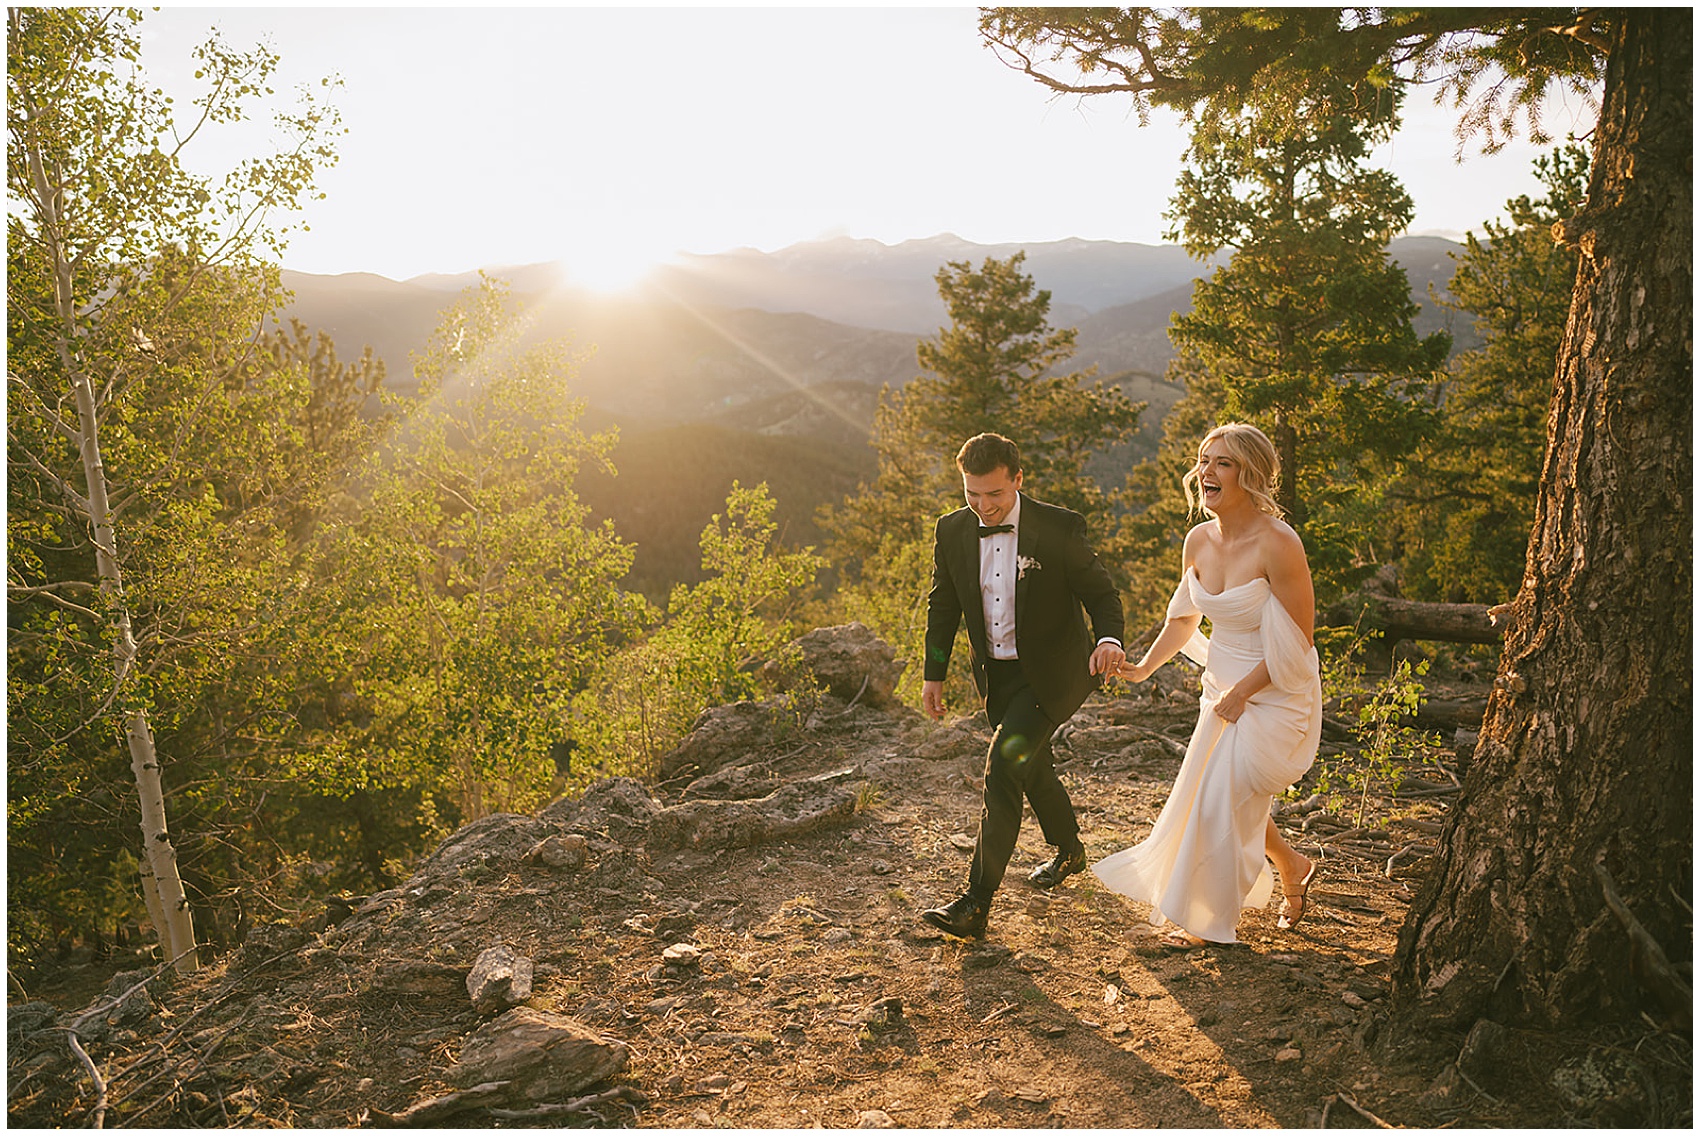 A groom laughs with his bride as he leads her up a mountain trail at their north star gatherings wedding